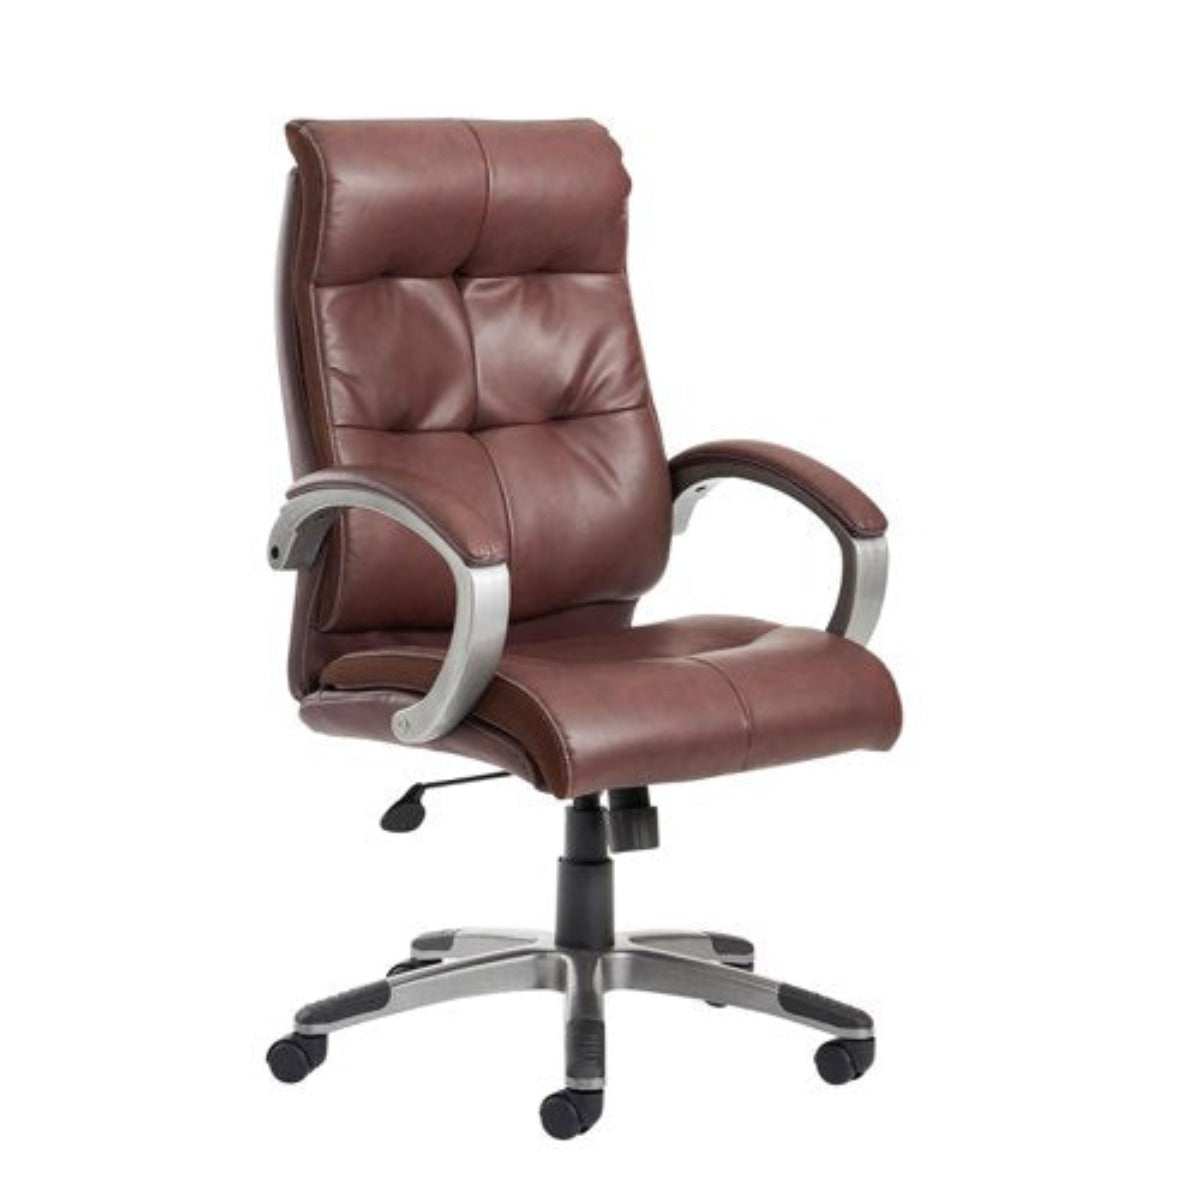 Cantania managers chair in brown leather faced